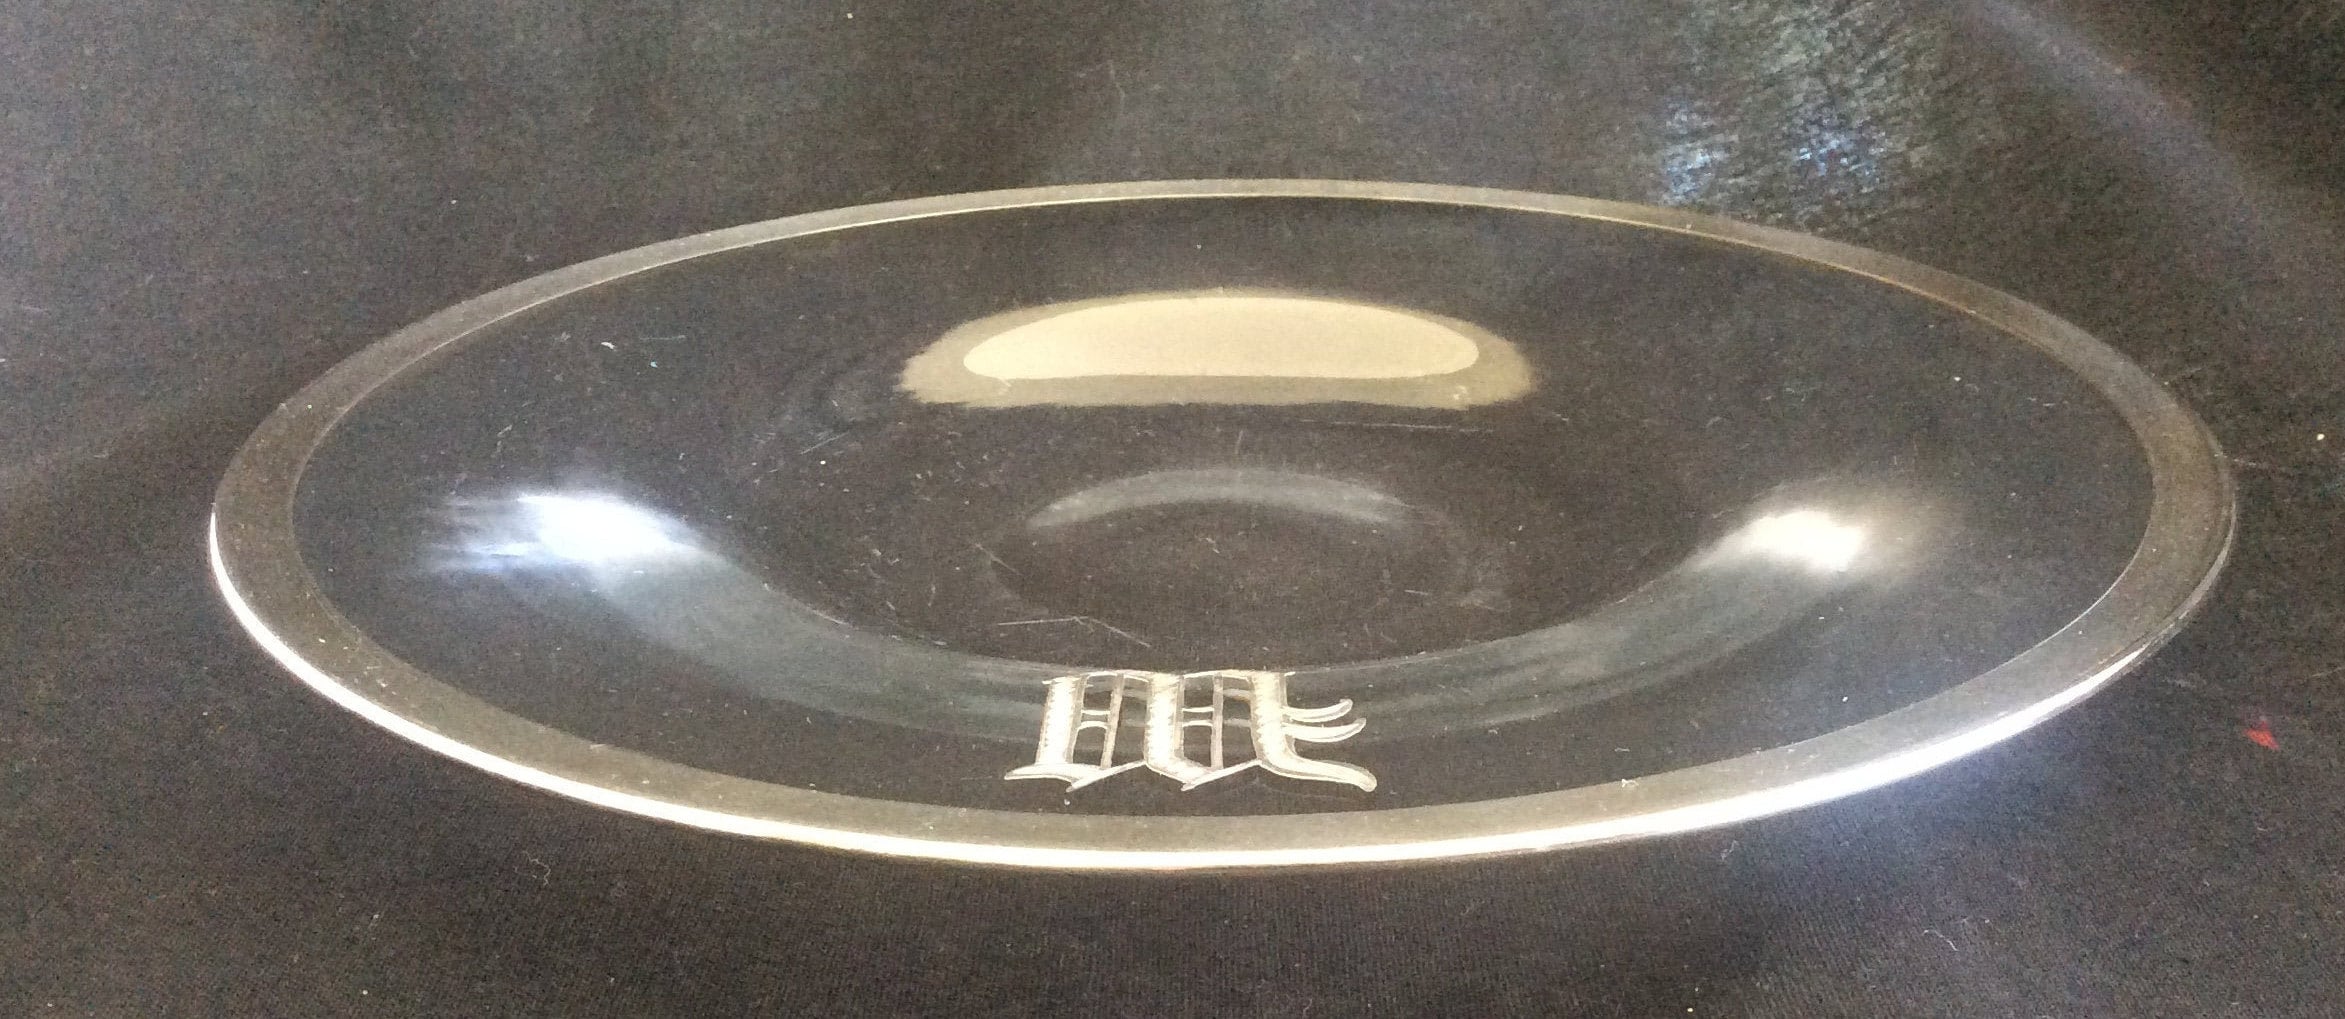 Plate Vintage Monogramed Overlay Silver Clear Glass Dish Shallow Bowl 8.5 Silver Overlay Rim Could Be A M Or A W